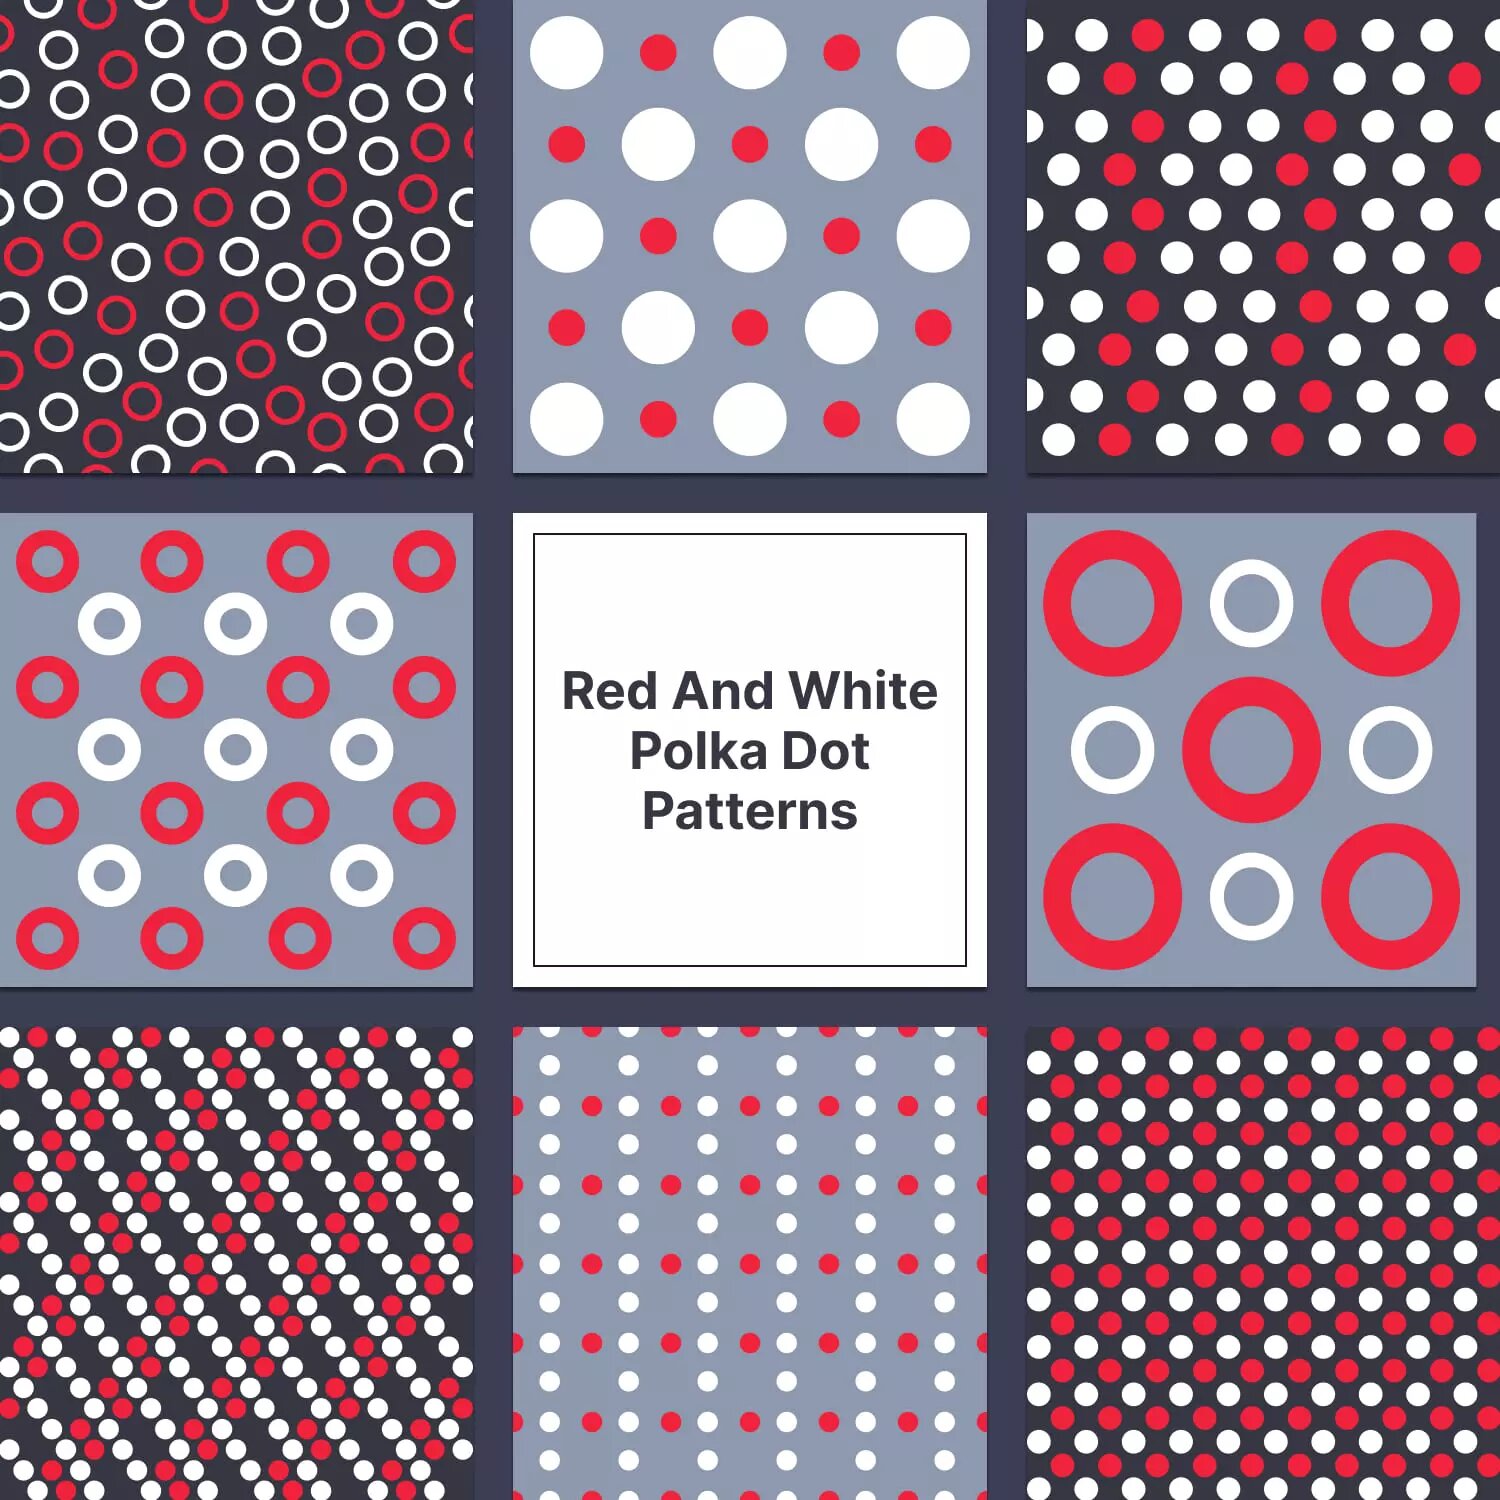 Red And White Polka Dot Patterns Preview 4.